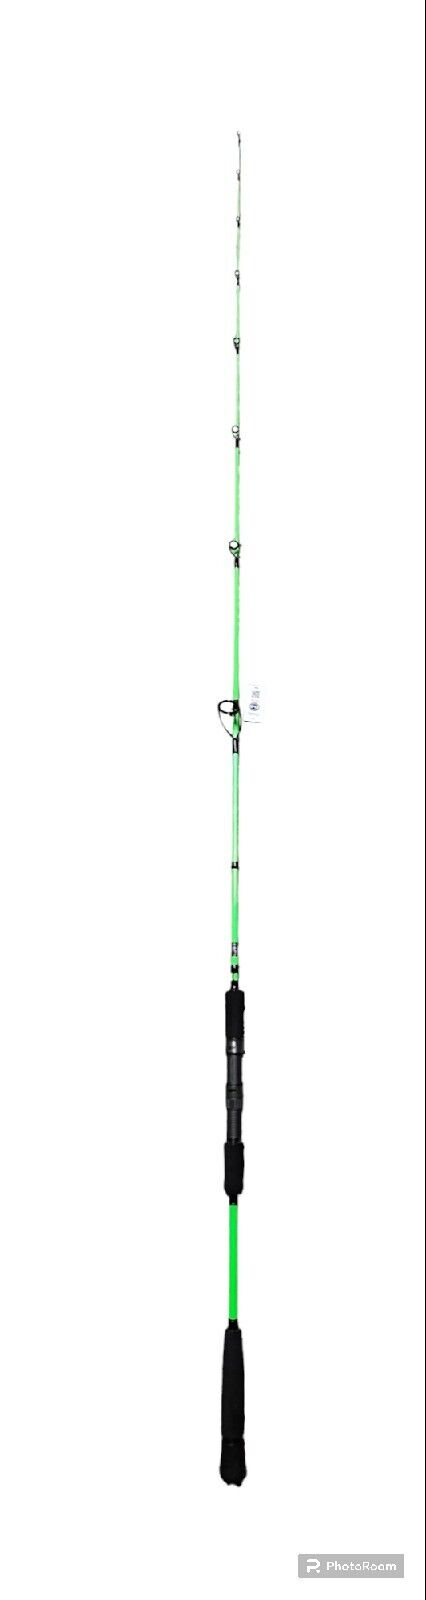 M3Tackle Carbon Drag-On Inshore Spinning Rod M3D701-MLF 7 17-35lbs 1/2-3oz  Fuji